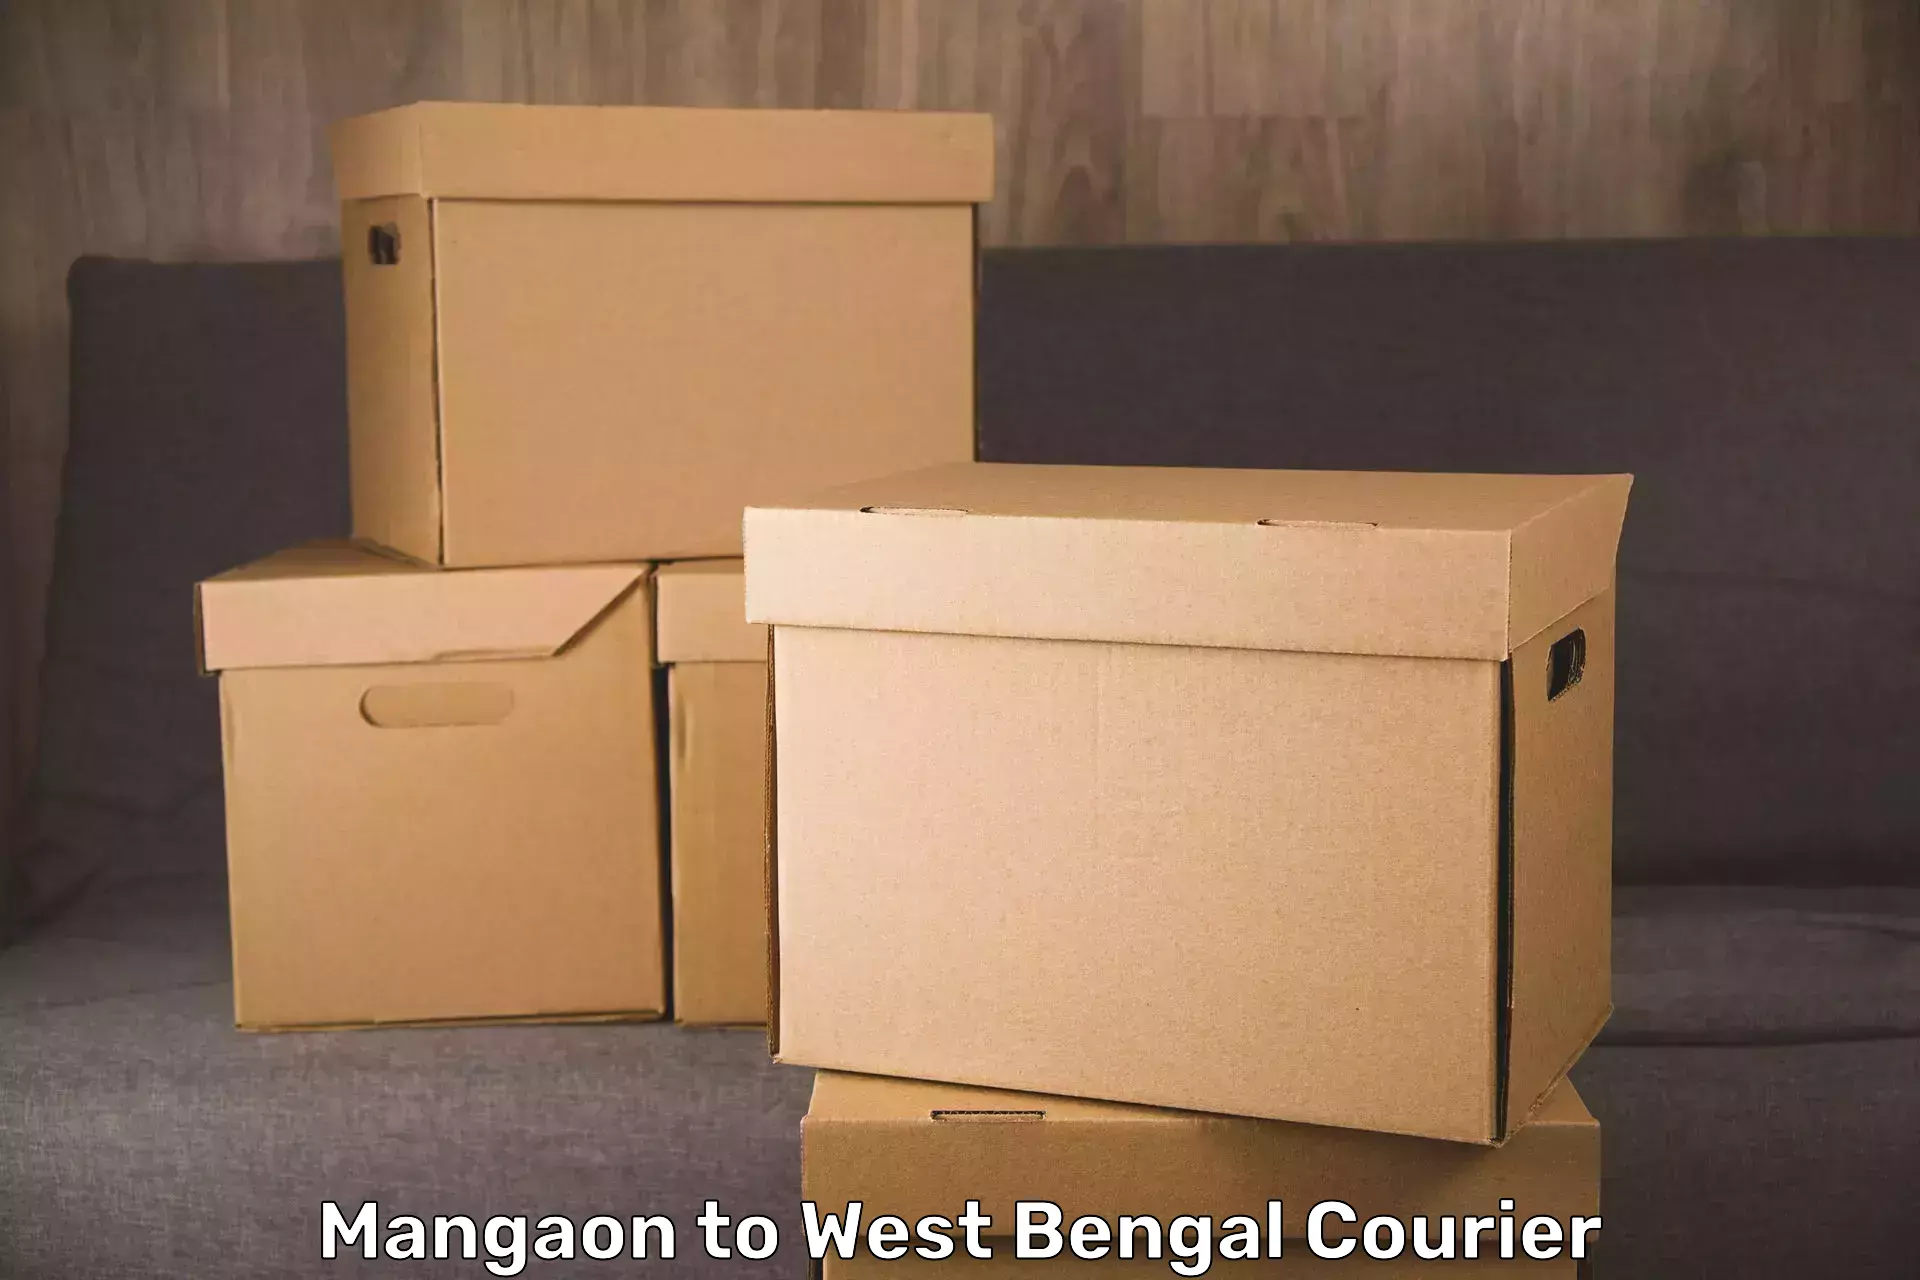 Luggage shipment specialists Mangaon to West Bengal